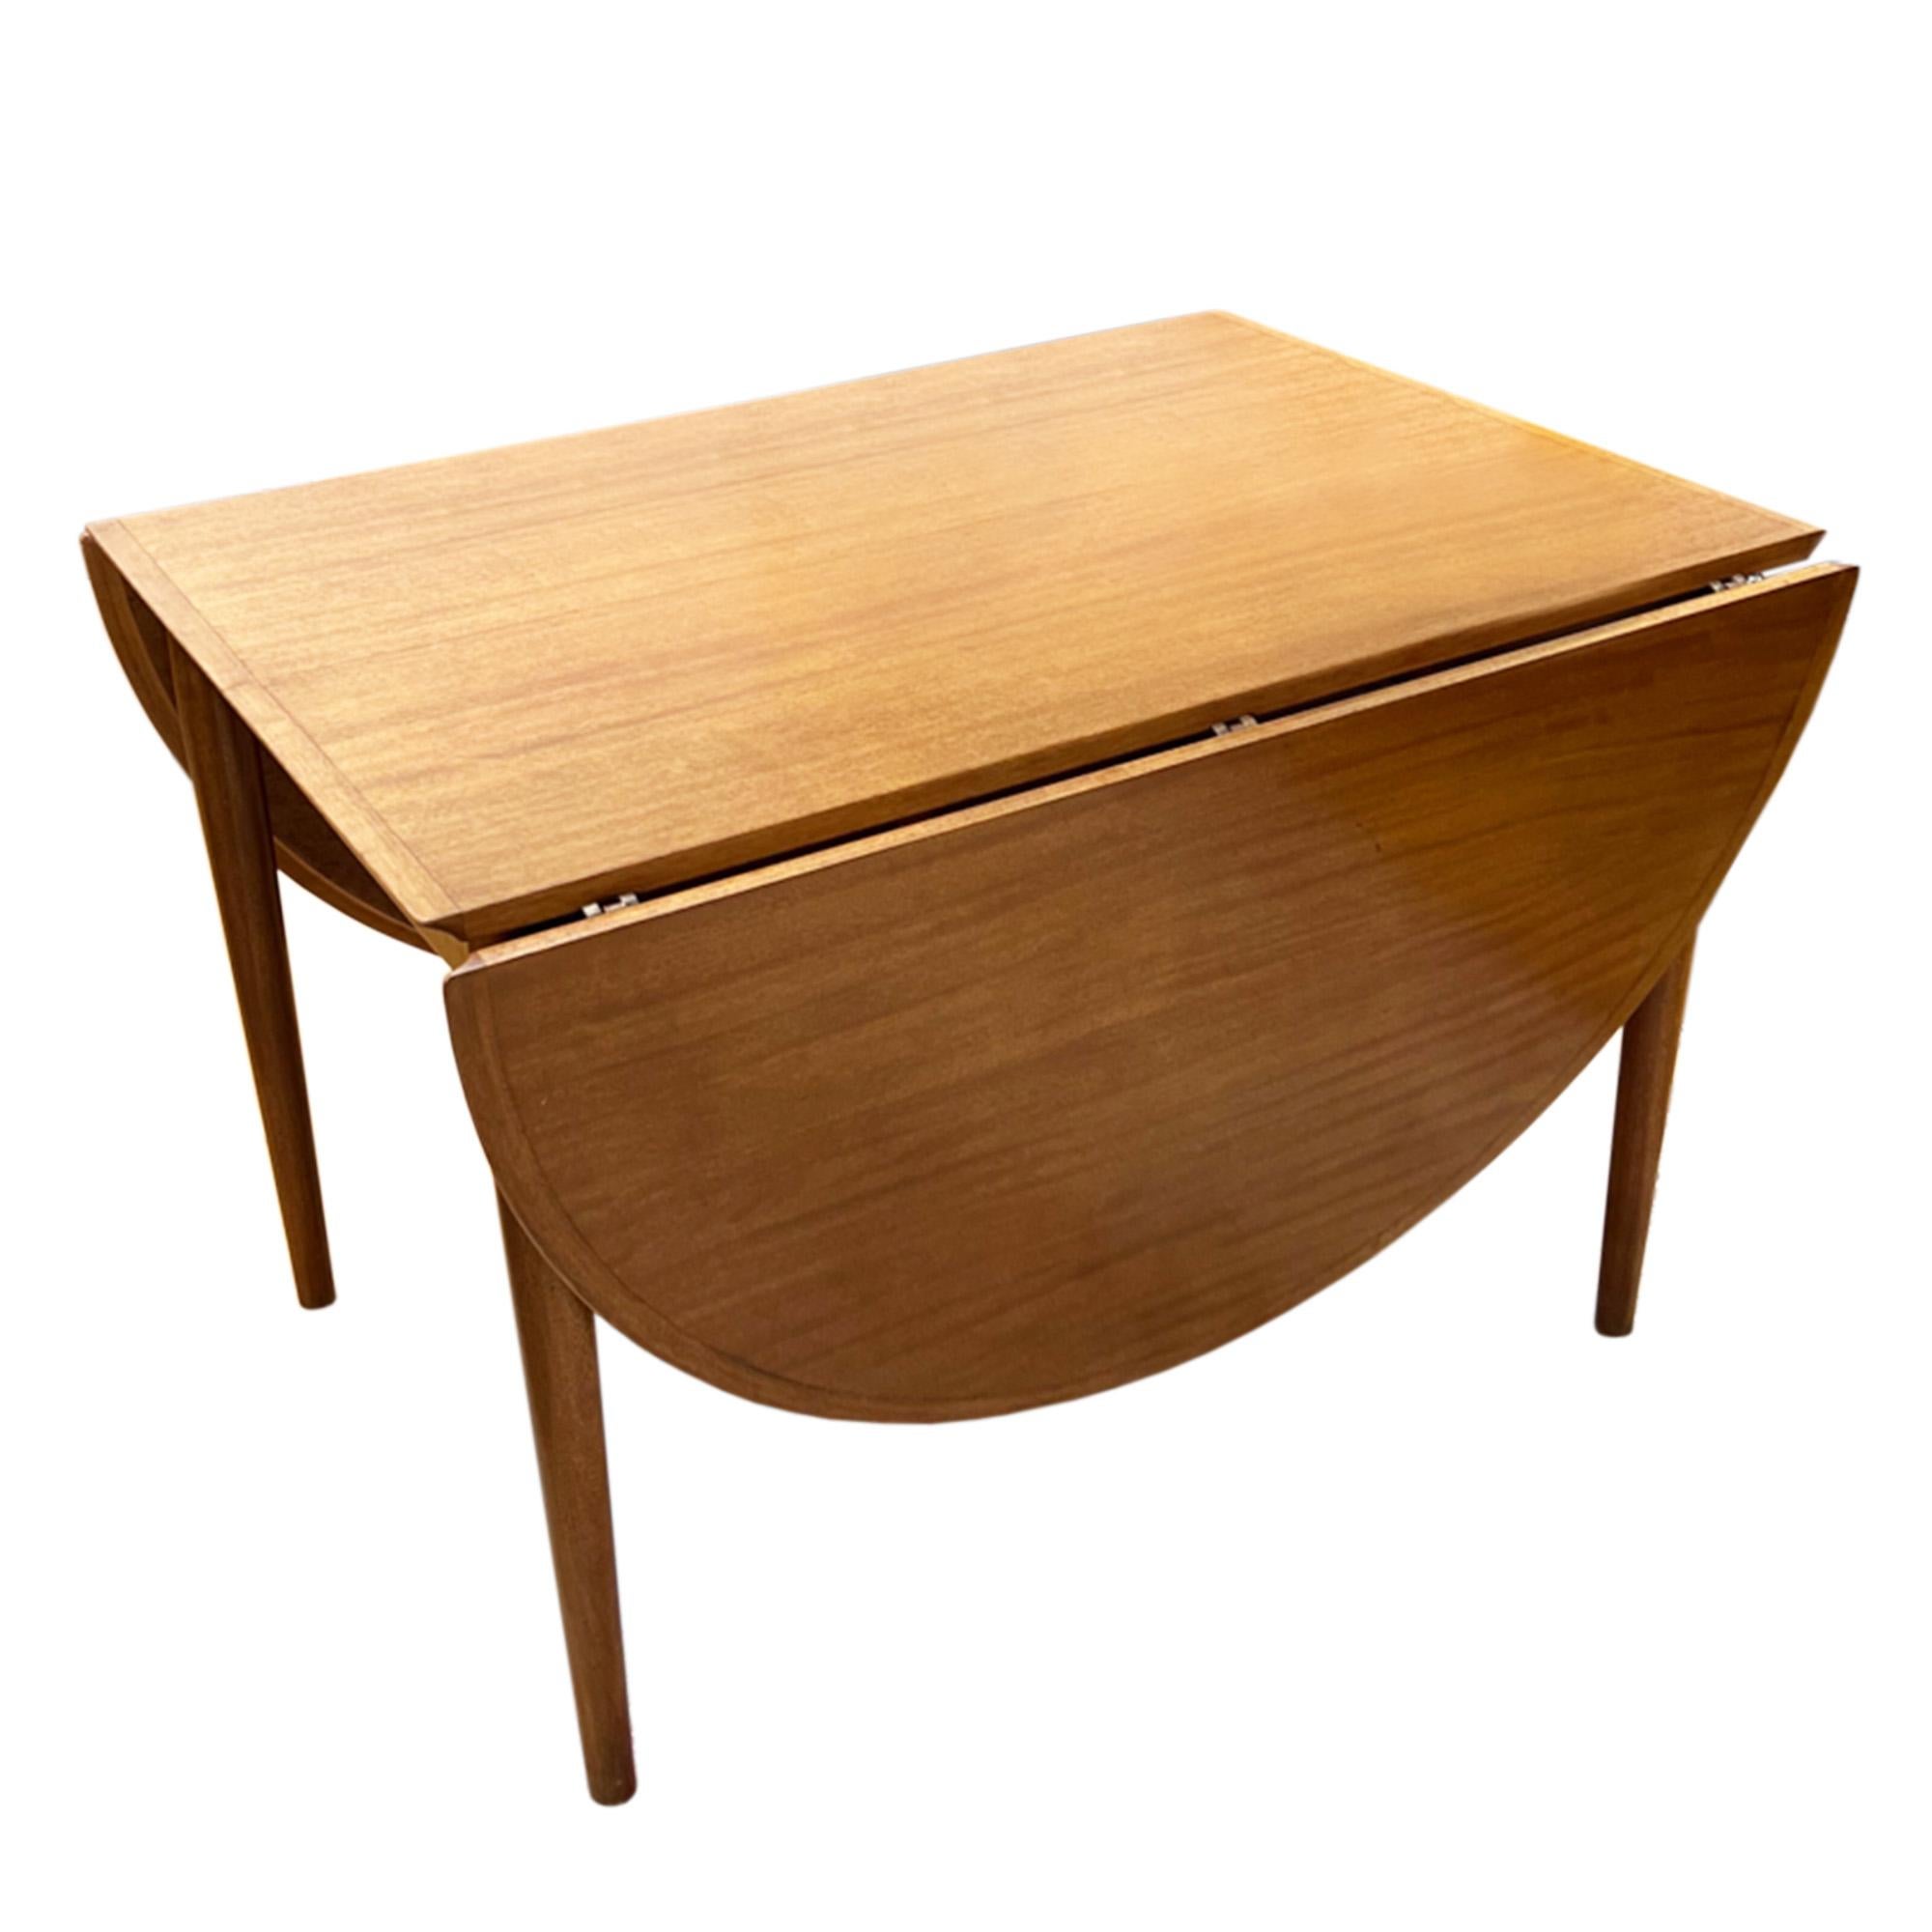 This is an excellent example of Danish midcentury furniture design.

This extendable dining table can be set at three different lengths with each leaf measuring 55cm long. The table can be 180cm, 235cm or 290cm long. 

Designed by Arne Vodder, this